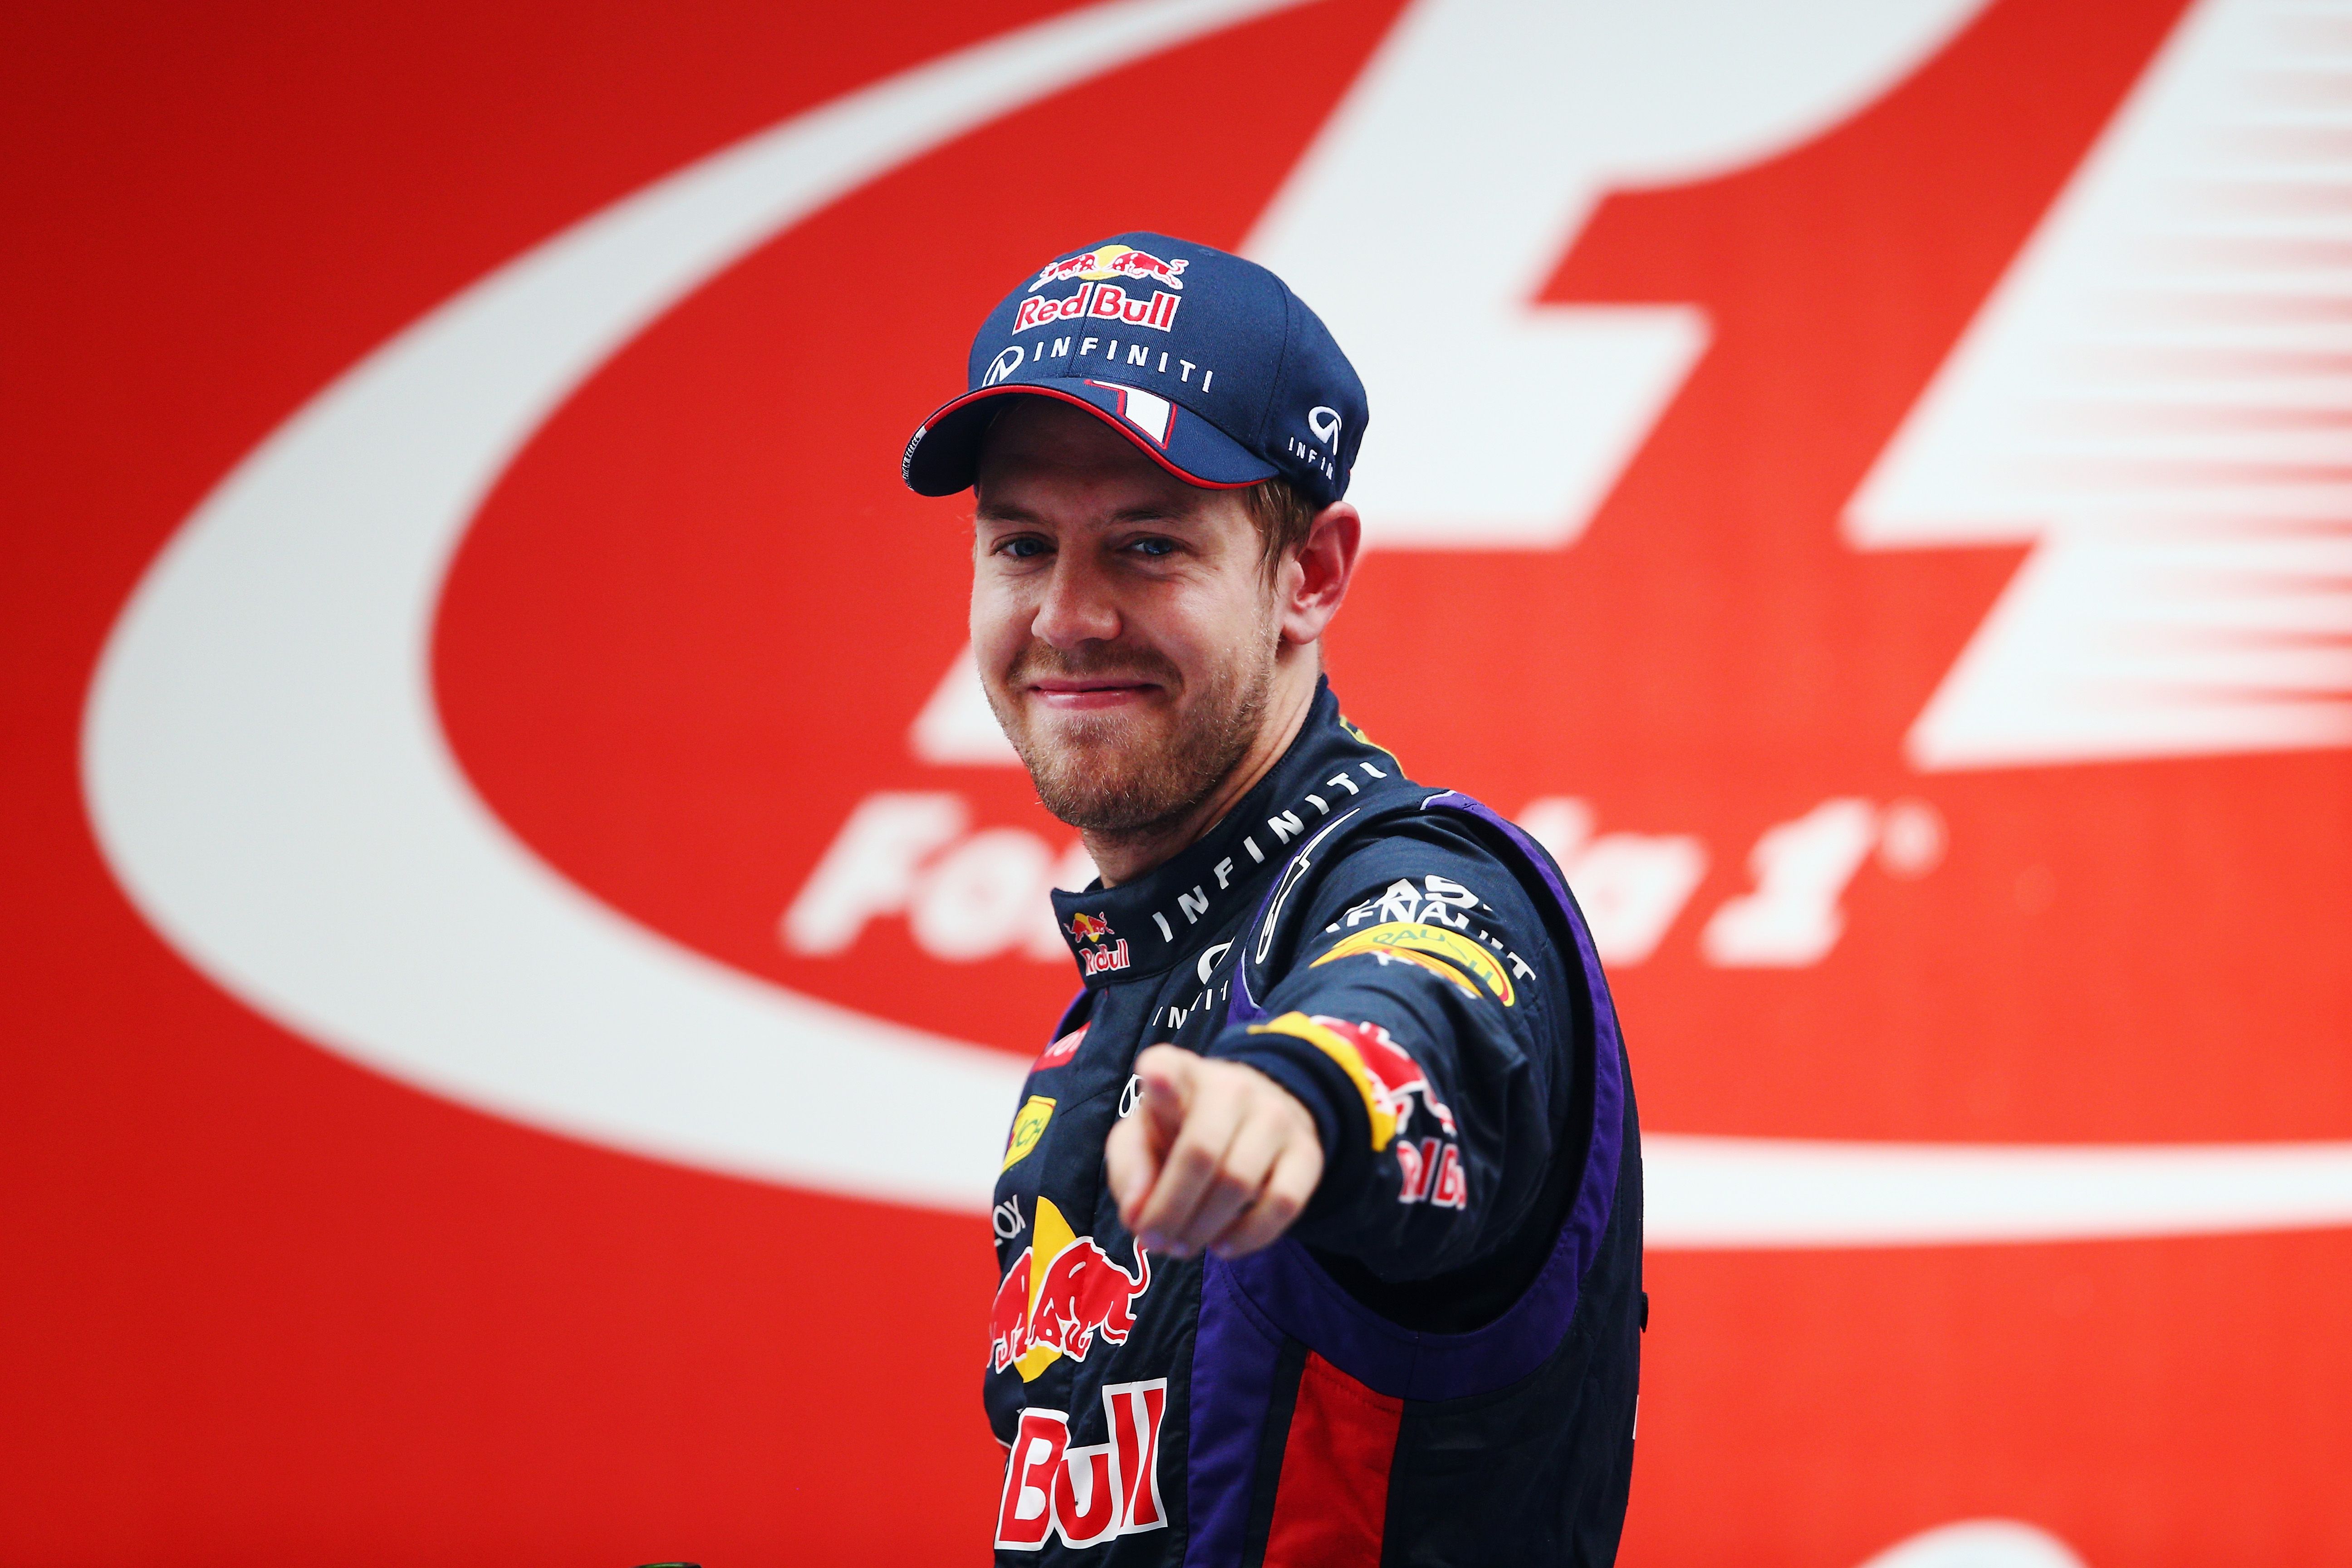 Vettel, Hamilton, Schumacher, Verstappen: Who is the greatest F1 driver of all time?